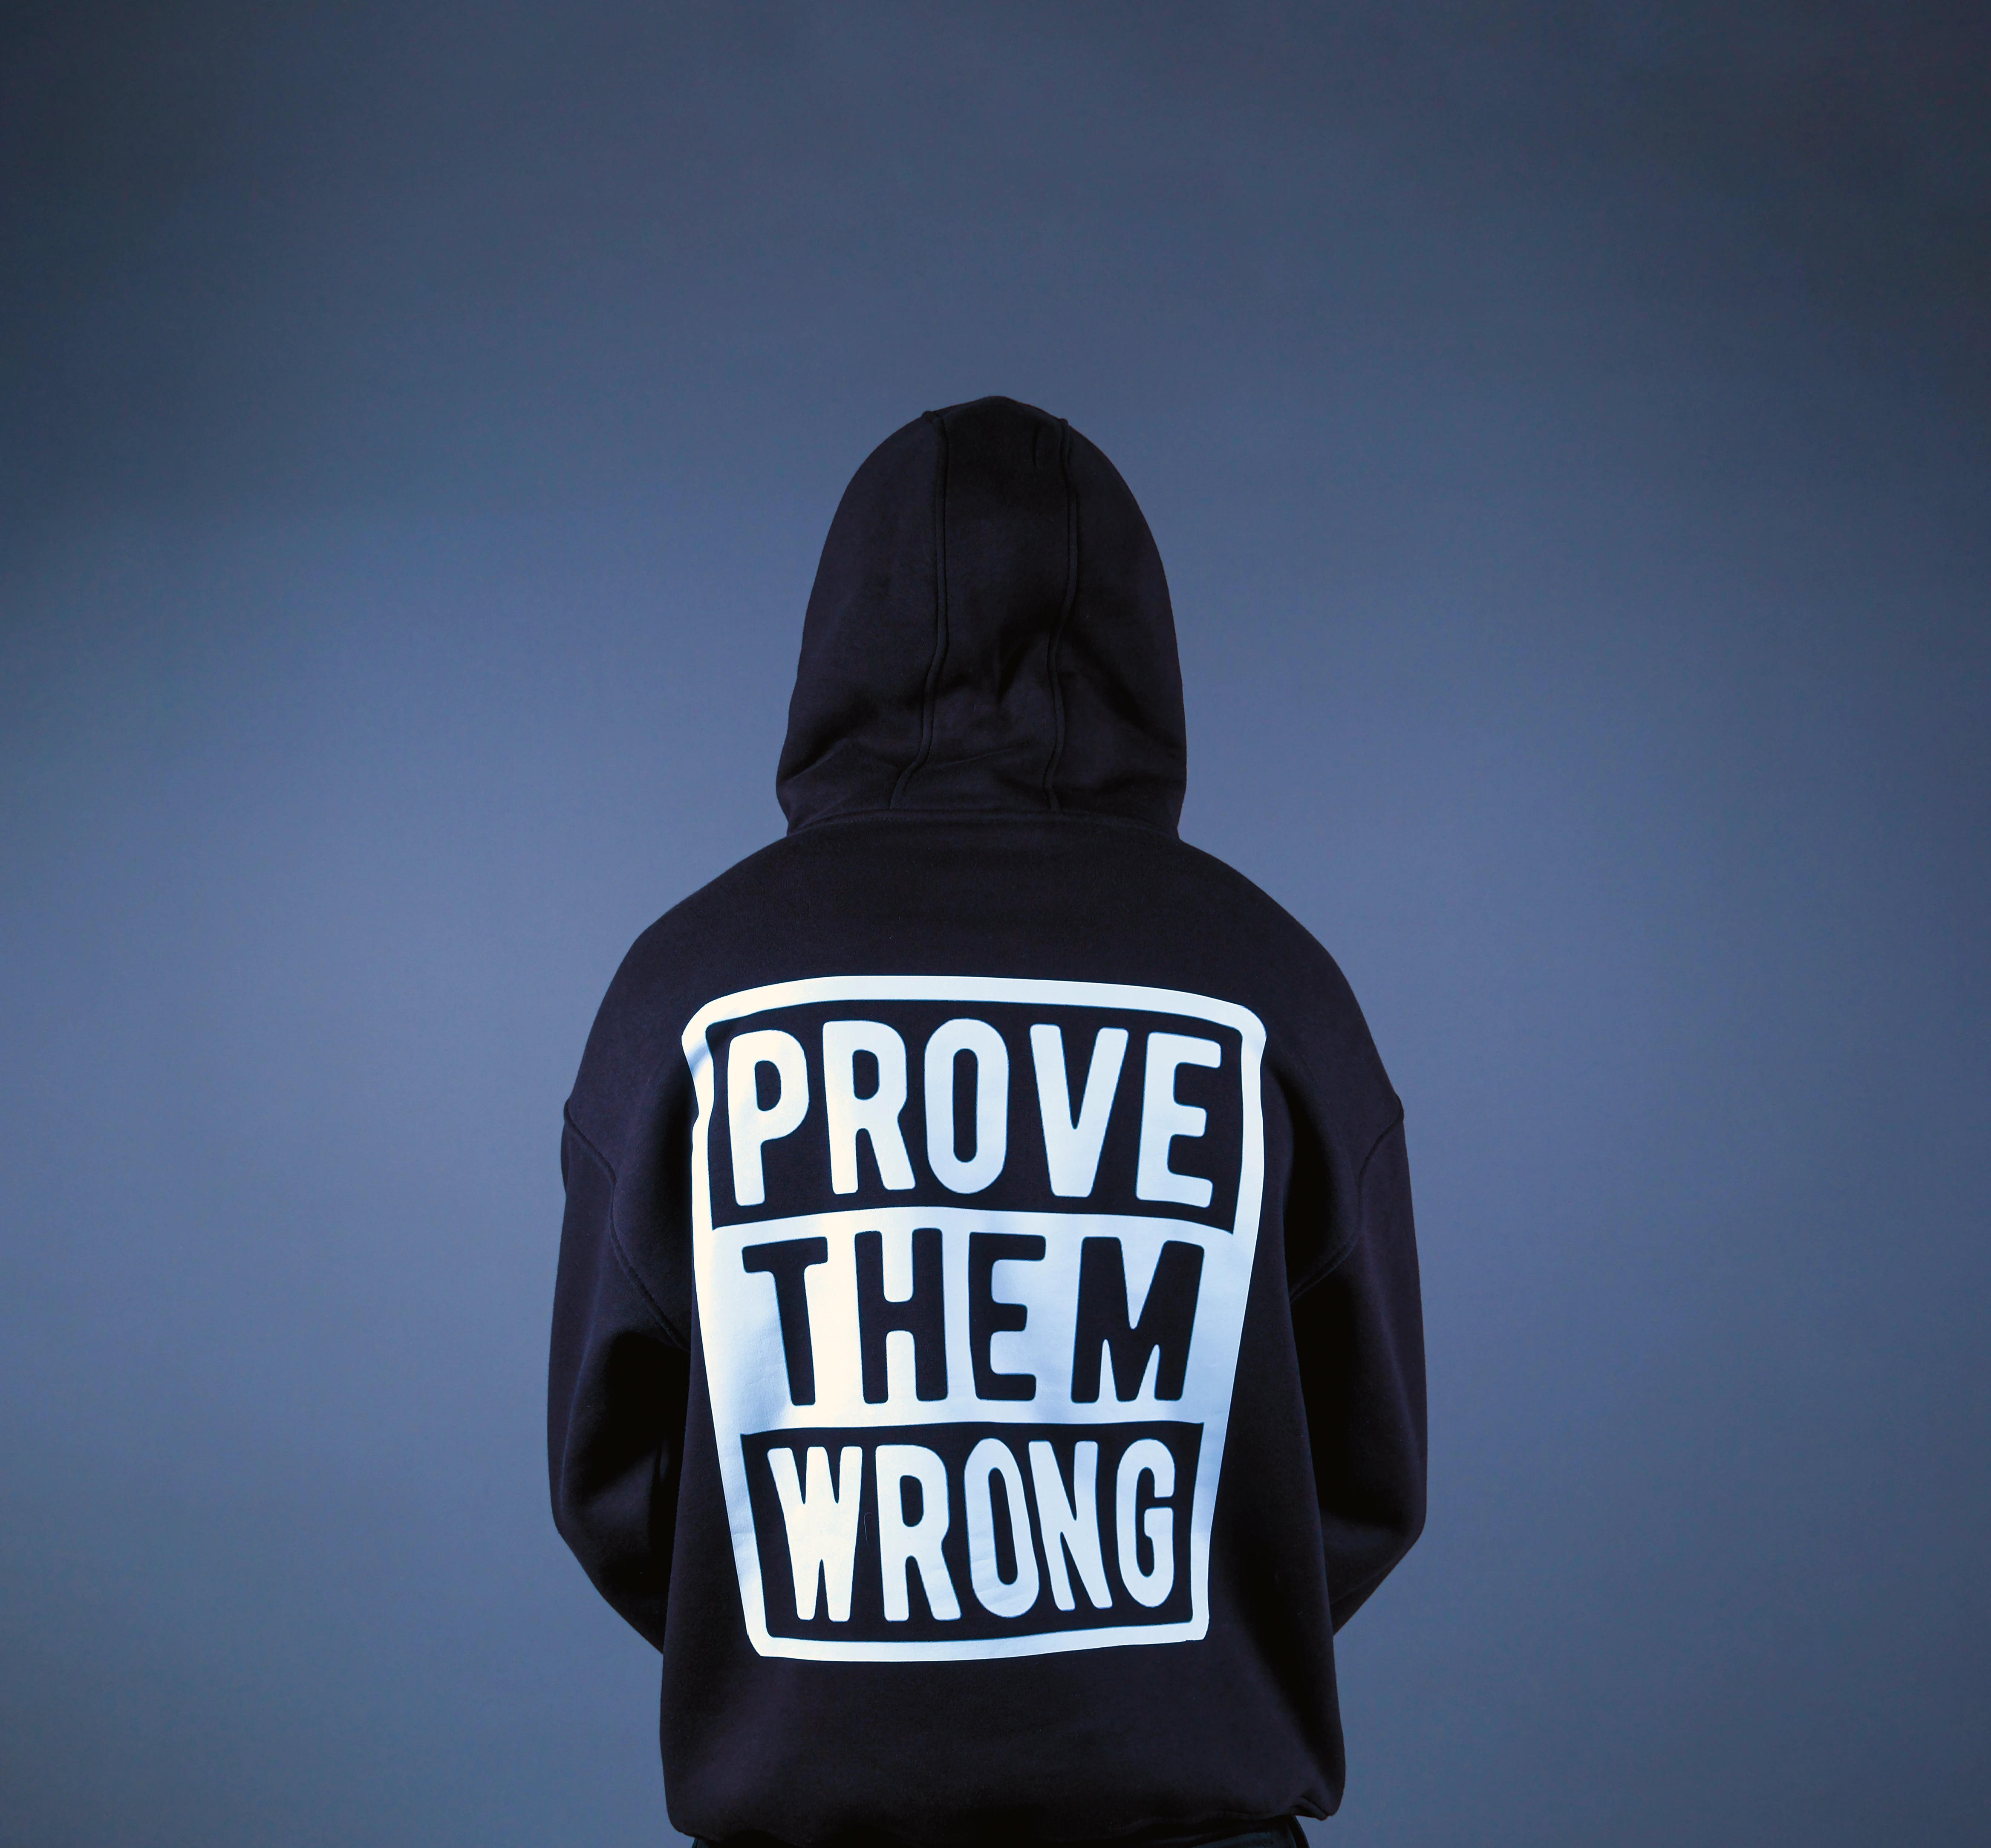 Prove them wrong hoodie